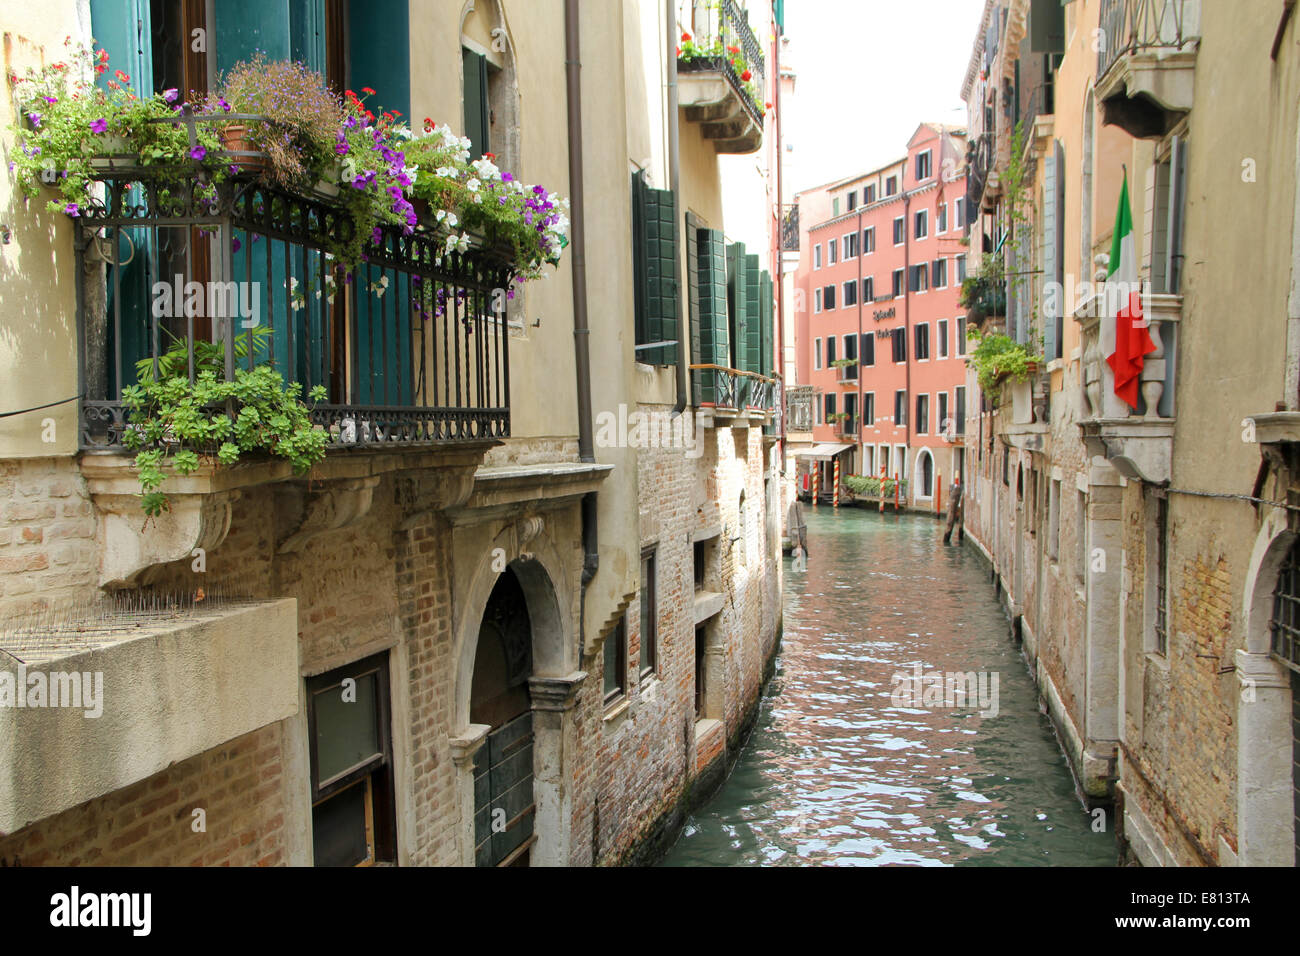 Canal in Venice. Urban landscape with houses, boats and water. Italy. Stock Photo